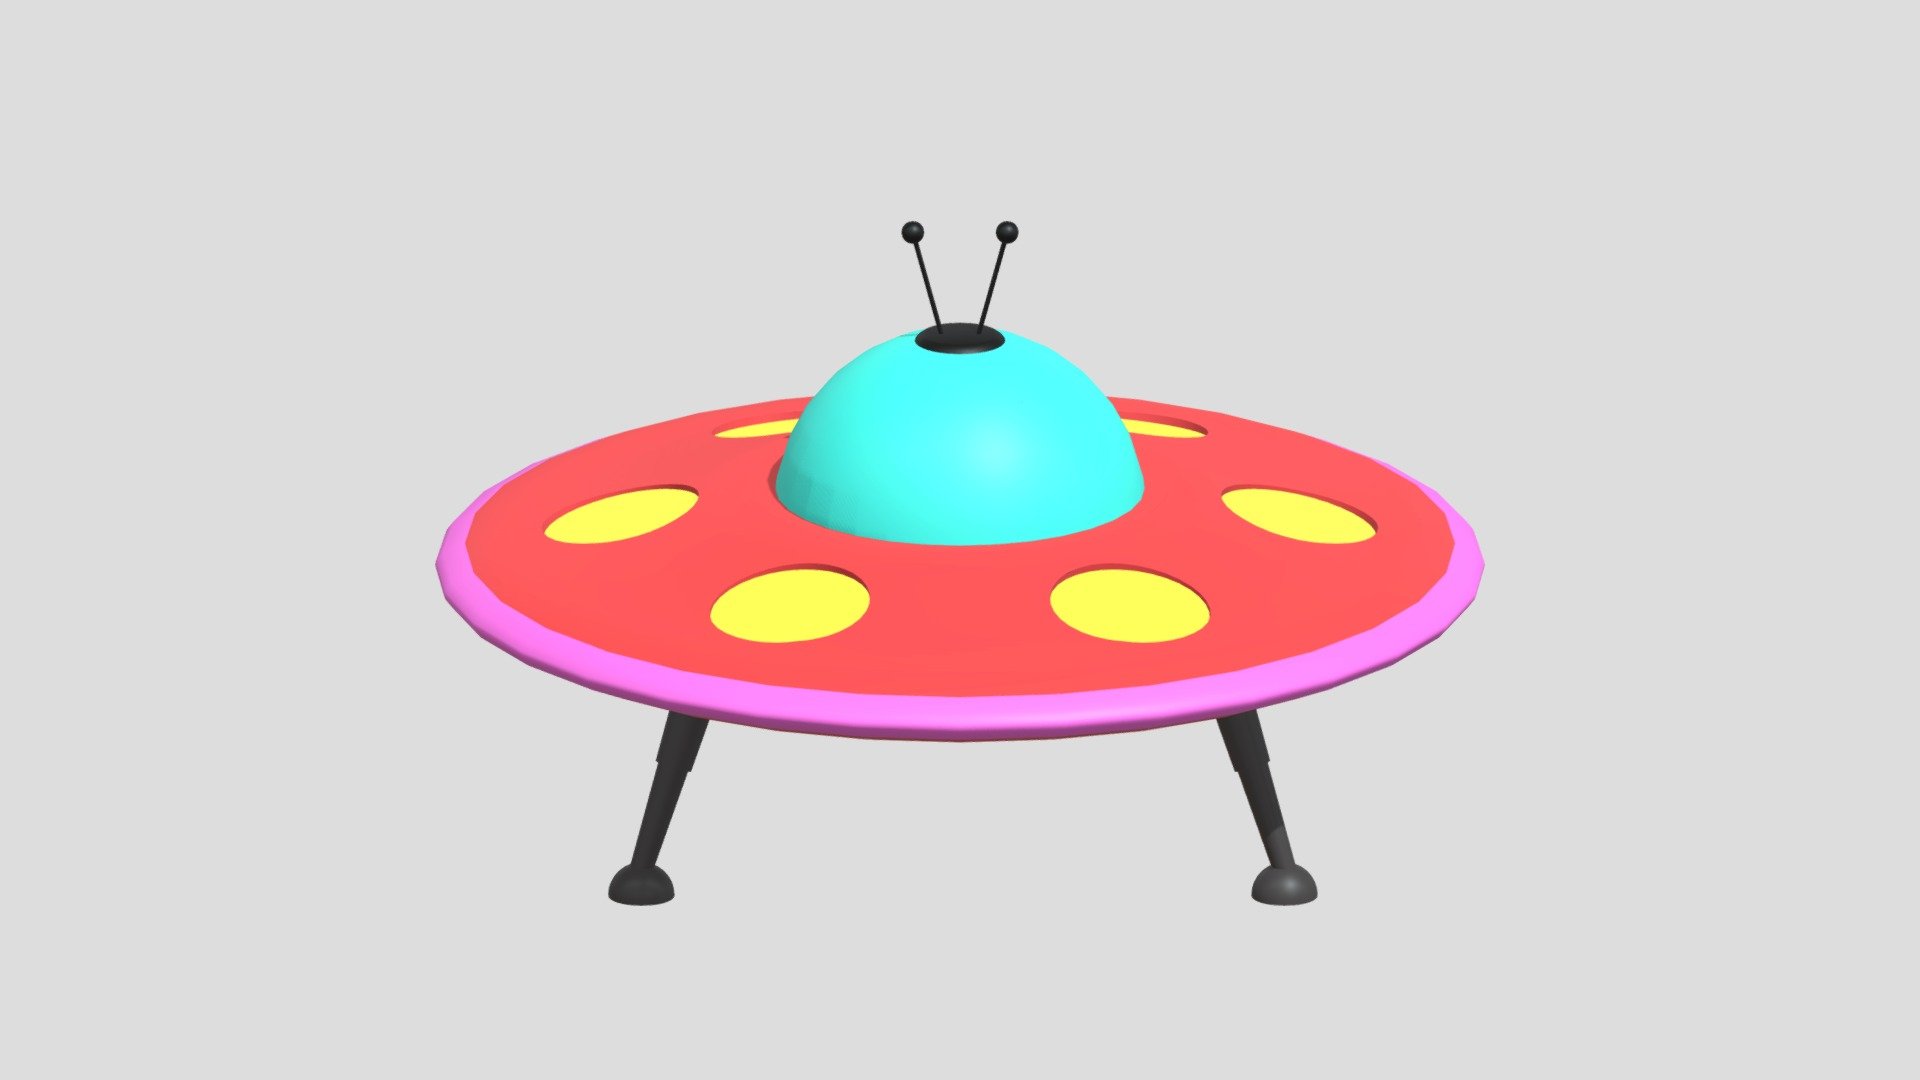 -Low Poly Cartoon UFO.

-This product contains 4 models.

-This product was created in Blender 2.8.

-Total vertices: 4,821 Total polygons: 4,228;

-Formats: . blend . fbx . obj, c4d,dae,fbx,unity.

-We hope you enjoy this model.

-Thank you 3d model